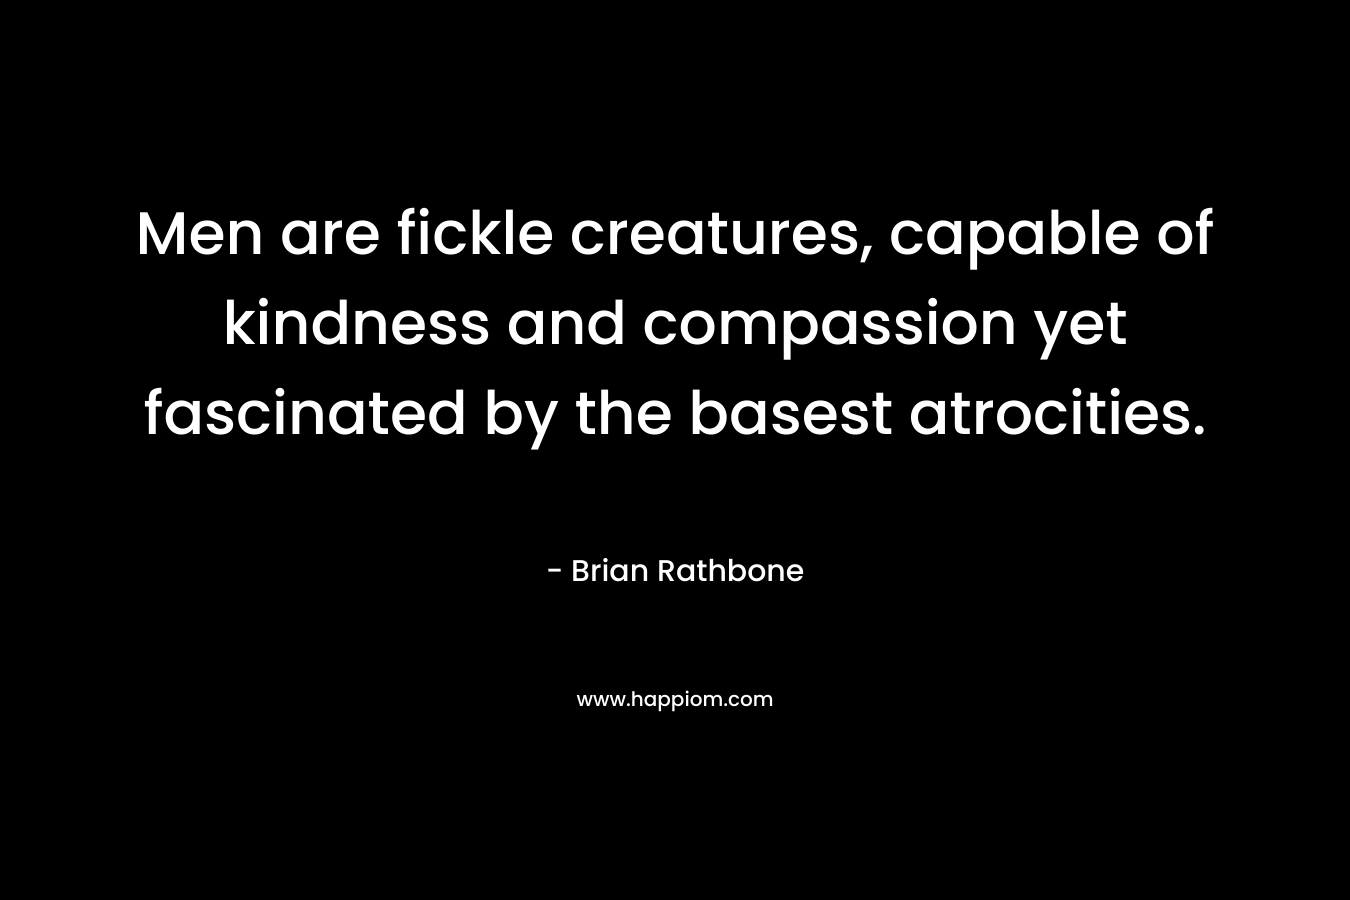 Men are fickle creatures, capable of kindness and compassion yet fascinated by the basest atrocities. – Brian Rathbone